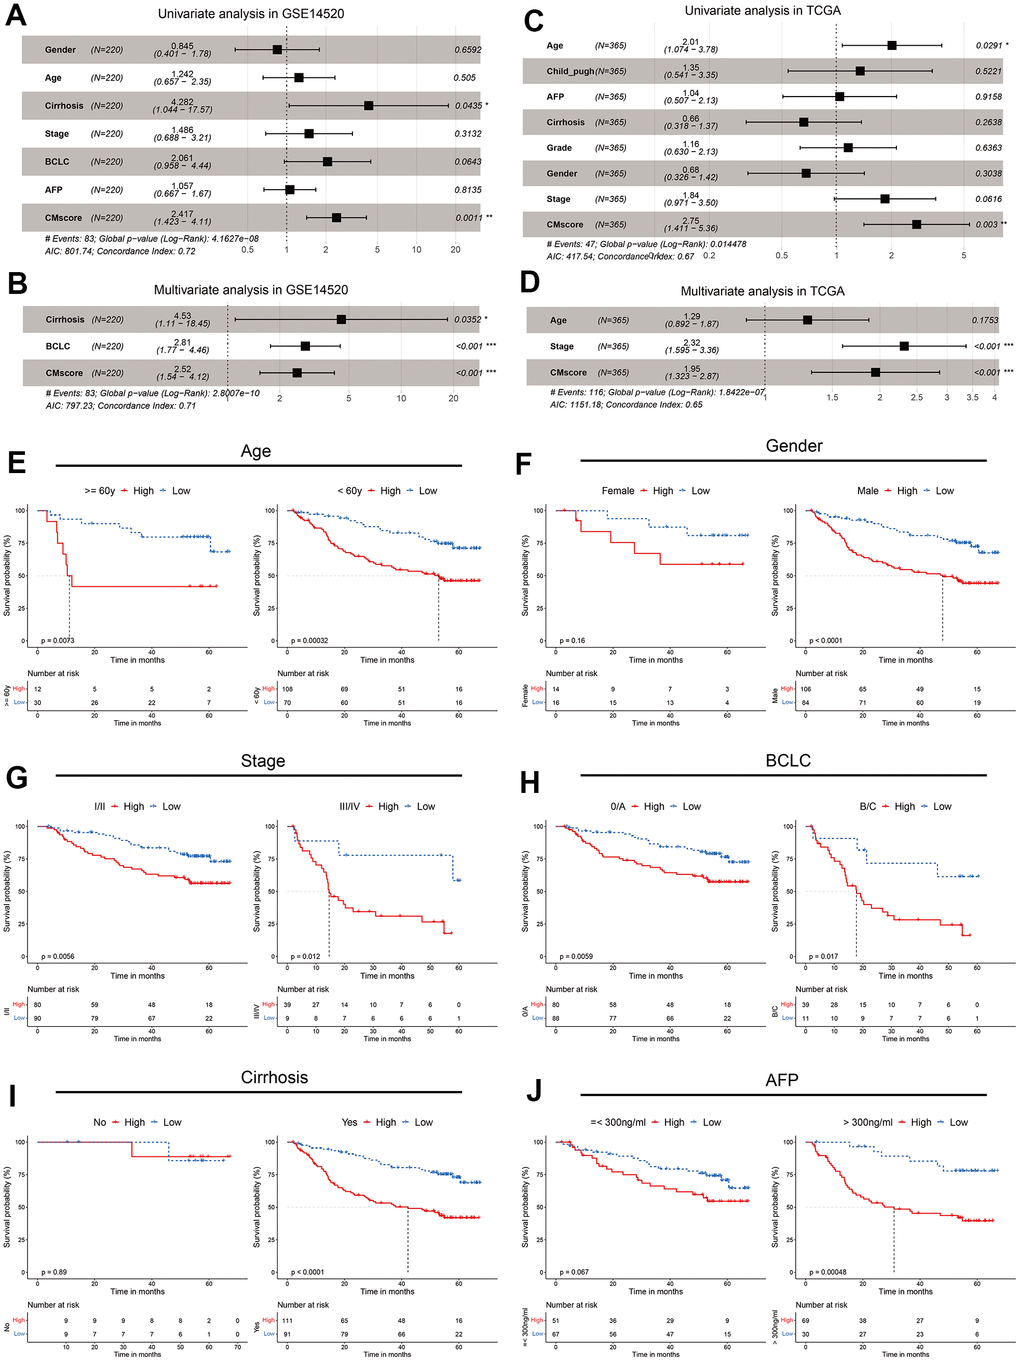 CMscore was an independent prognostic predictor for HCC patients. (A, B) Results of the univariate (A) and multivariate (B) Cox regression analyses regarding OS in the GSE14520 cohort. (C, D) Results of the univariate (C) and multivariate (D) Cox regression analyses regarding OS in the TCGA-LIHC cohort. (E–J) Prognostic analyses of CMscore in subgroups of HCC patients stratified by age (E), gender (F), stage (G), BCLC stage (H), cirrhosis status (I) and AFP level (J).